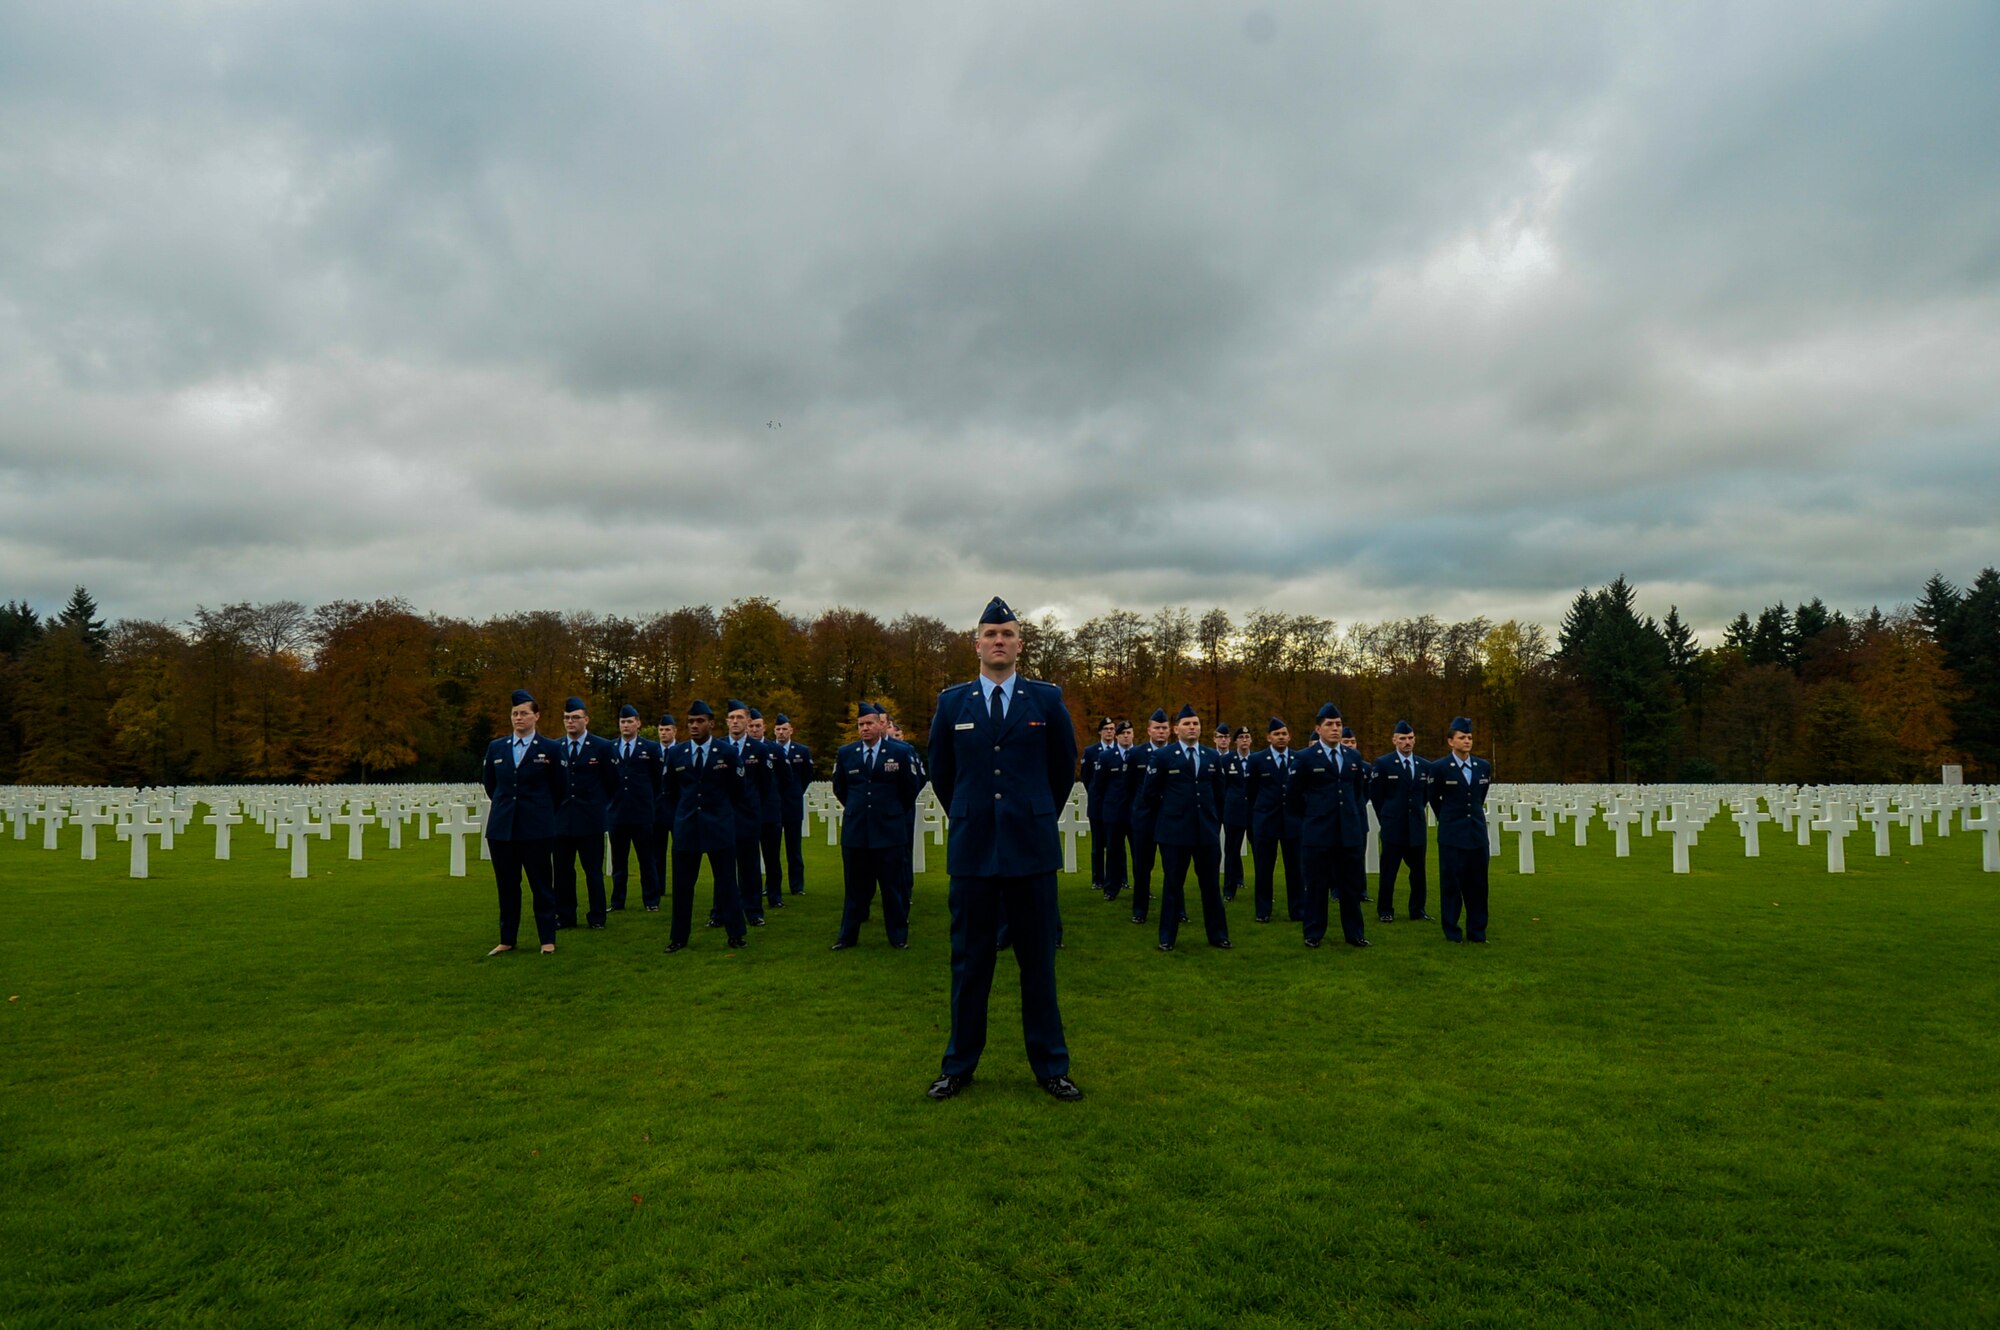 A detail of Airmen assigned to the 52nd Fighter Wing, Spangdahlem Air Base, Germany, stand at parade rest before a Memorial Day ceremony at the Luxembourg American Military Cemetery and Memorial in Luxembourg, Nov. 11, 2016. The ceremony paid tribute to the legacy of service of members of the American armed forces. (U.S. Air Force photo by Staff Sgt. Joe W. McFadden)